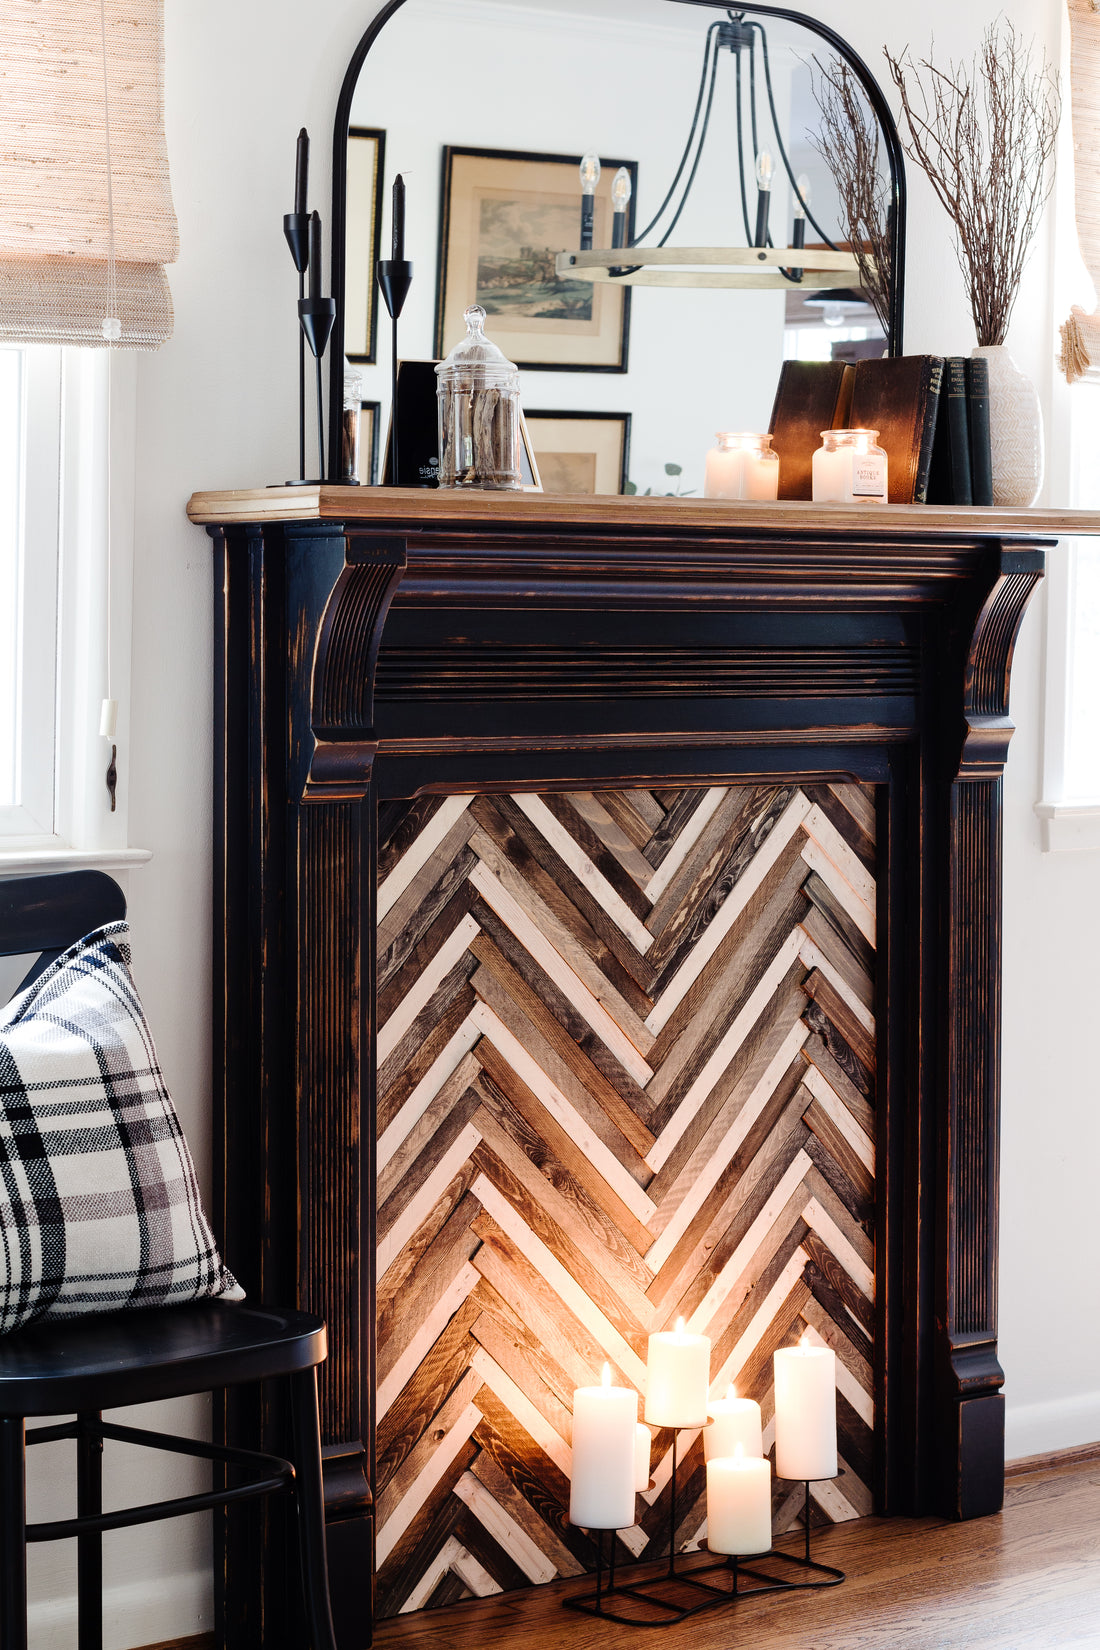 DIY Faux Mantle with Milk Paint and SFO - Homestead House